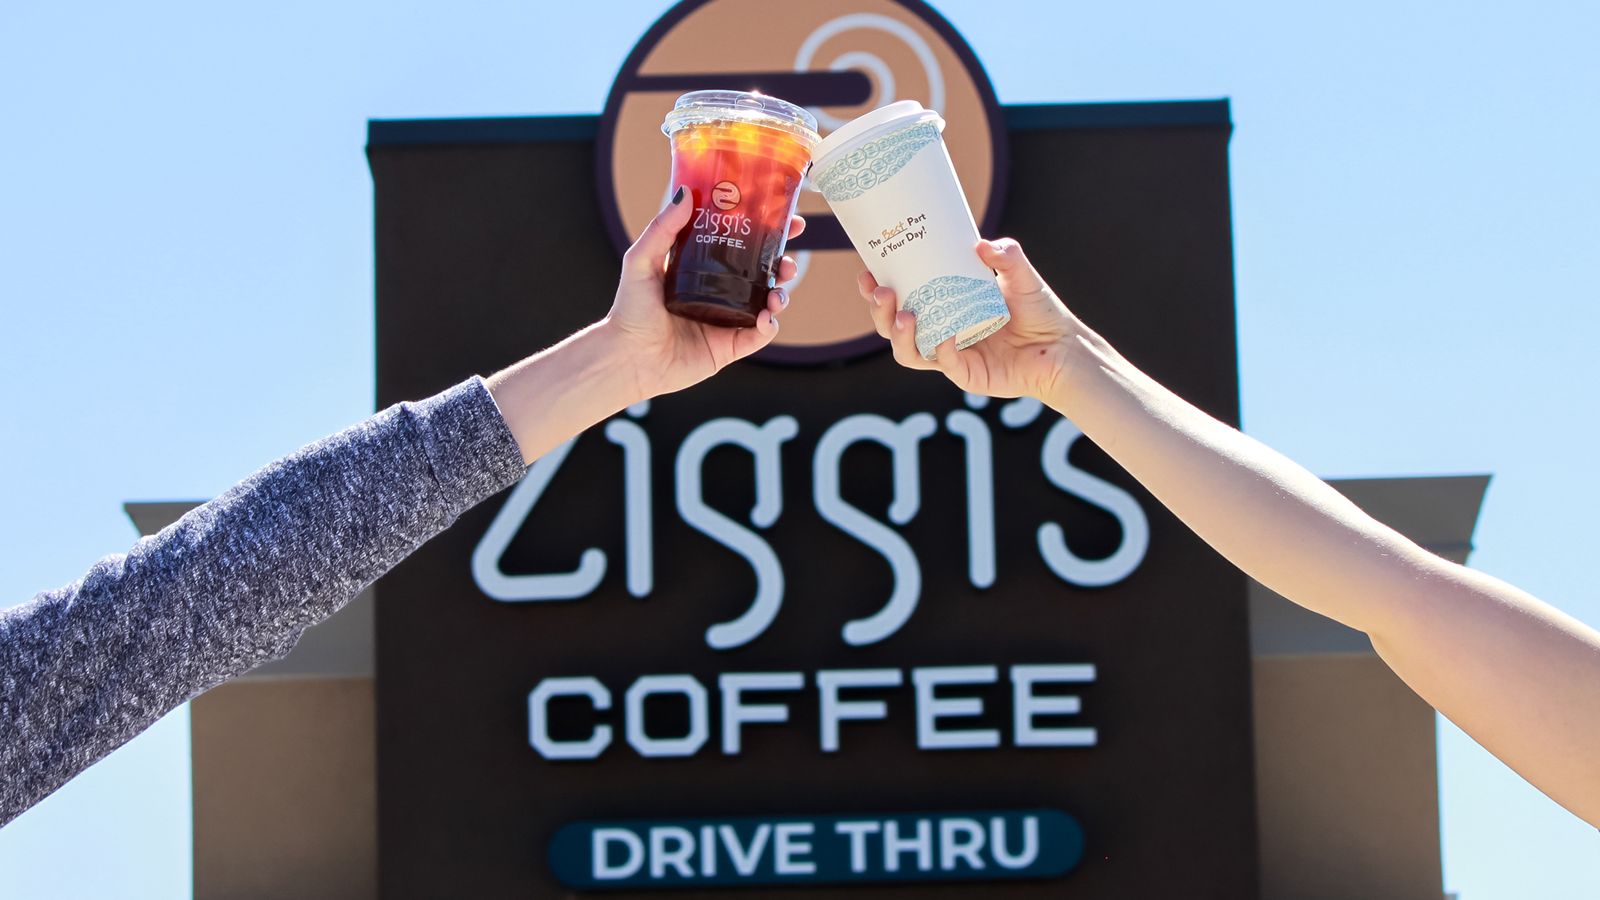 Ziggi's Coffee Family Values Rank High for New Franchisees in Colorado Springs